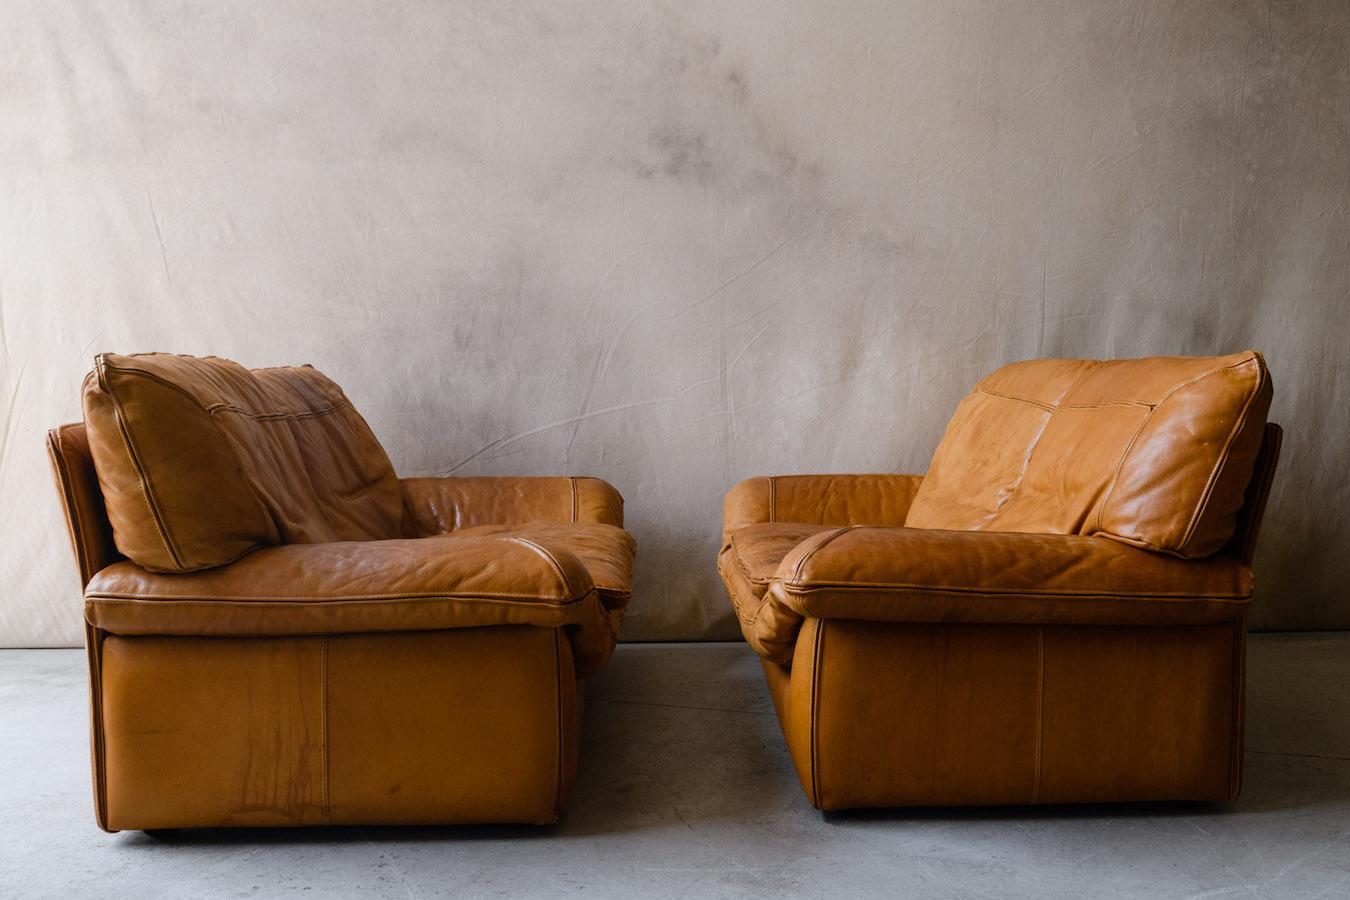 Late 20th Century Vintage Pair of Leather Roche Bobois Sofas, from France, Circa 1970